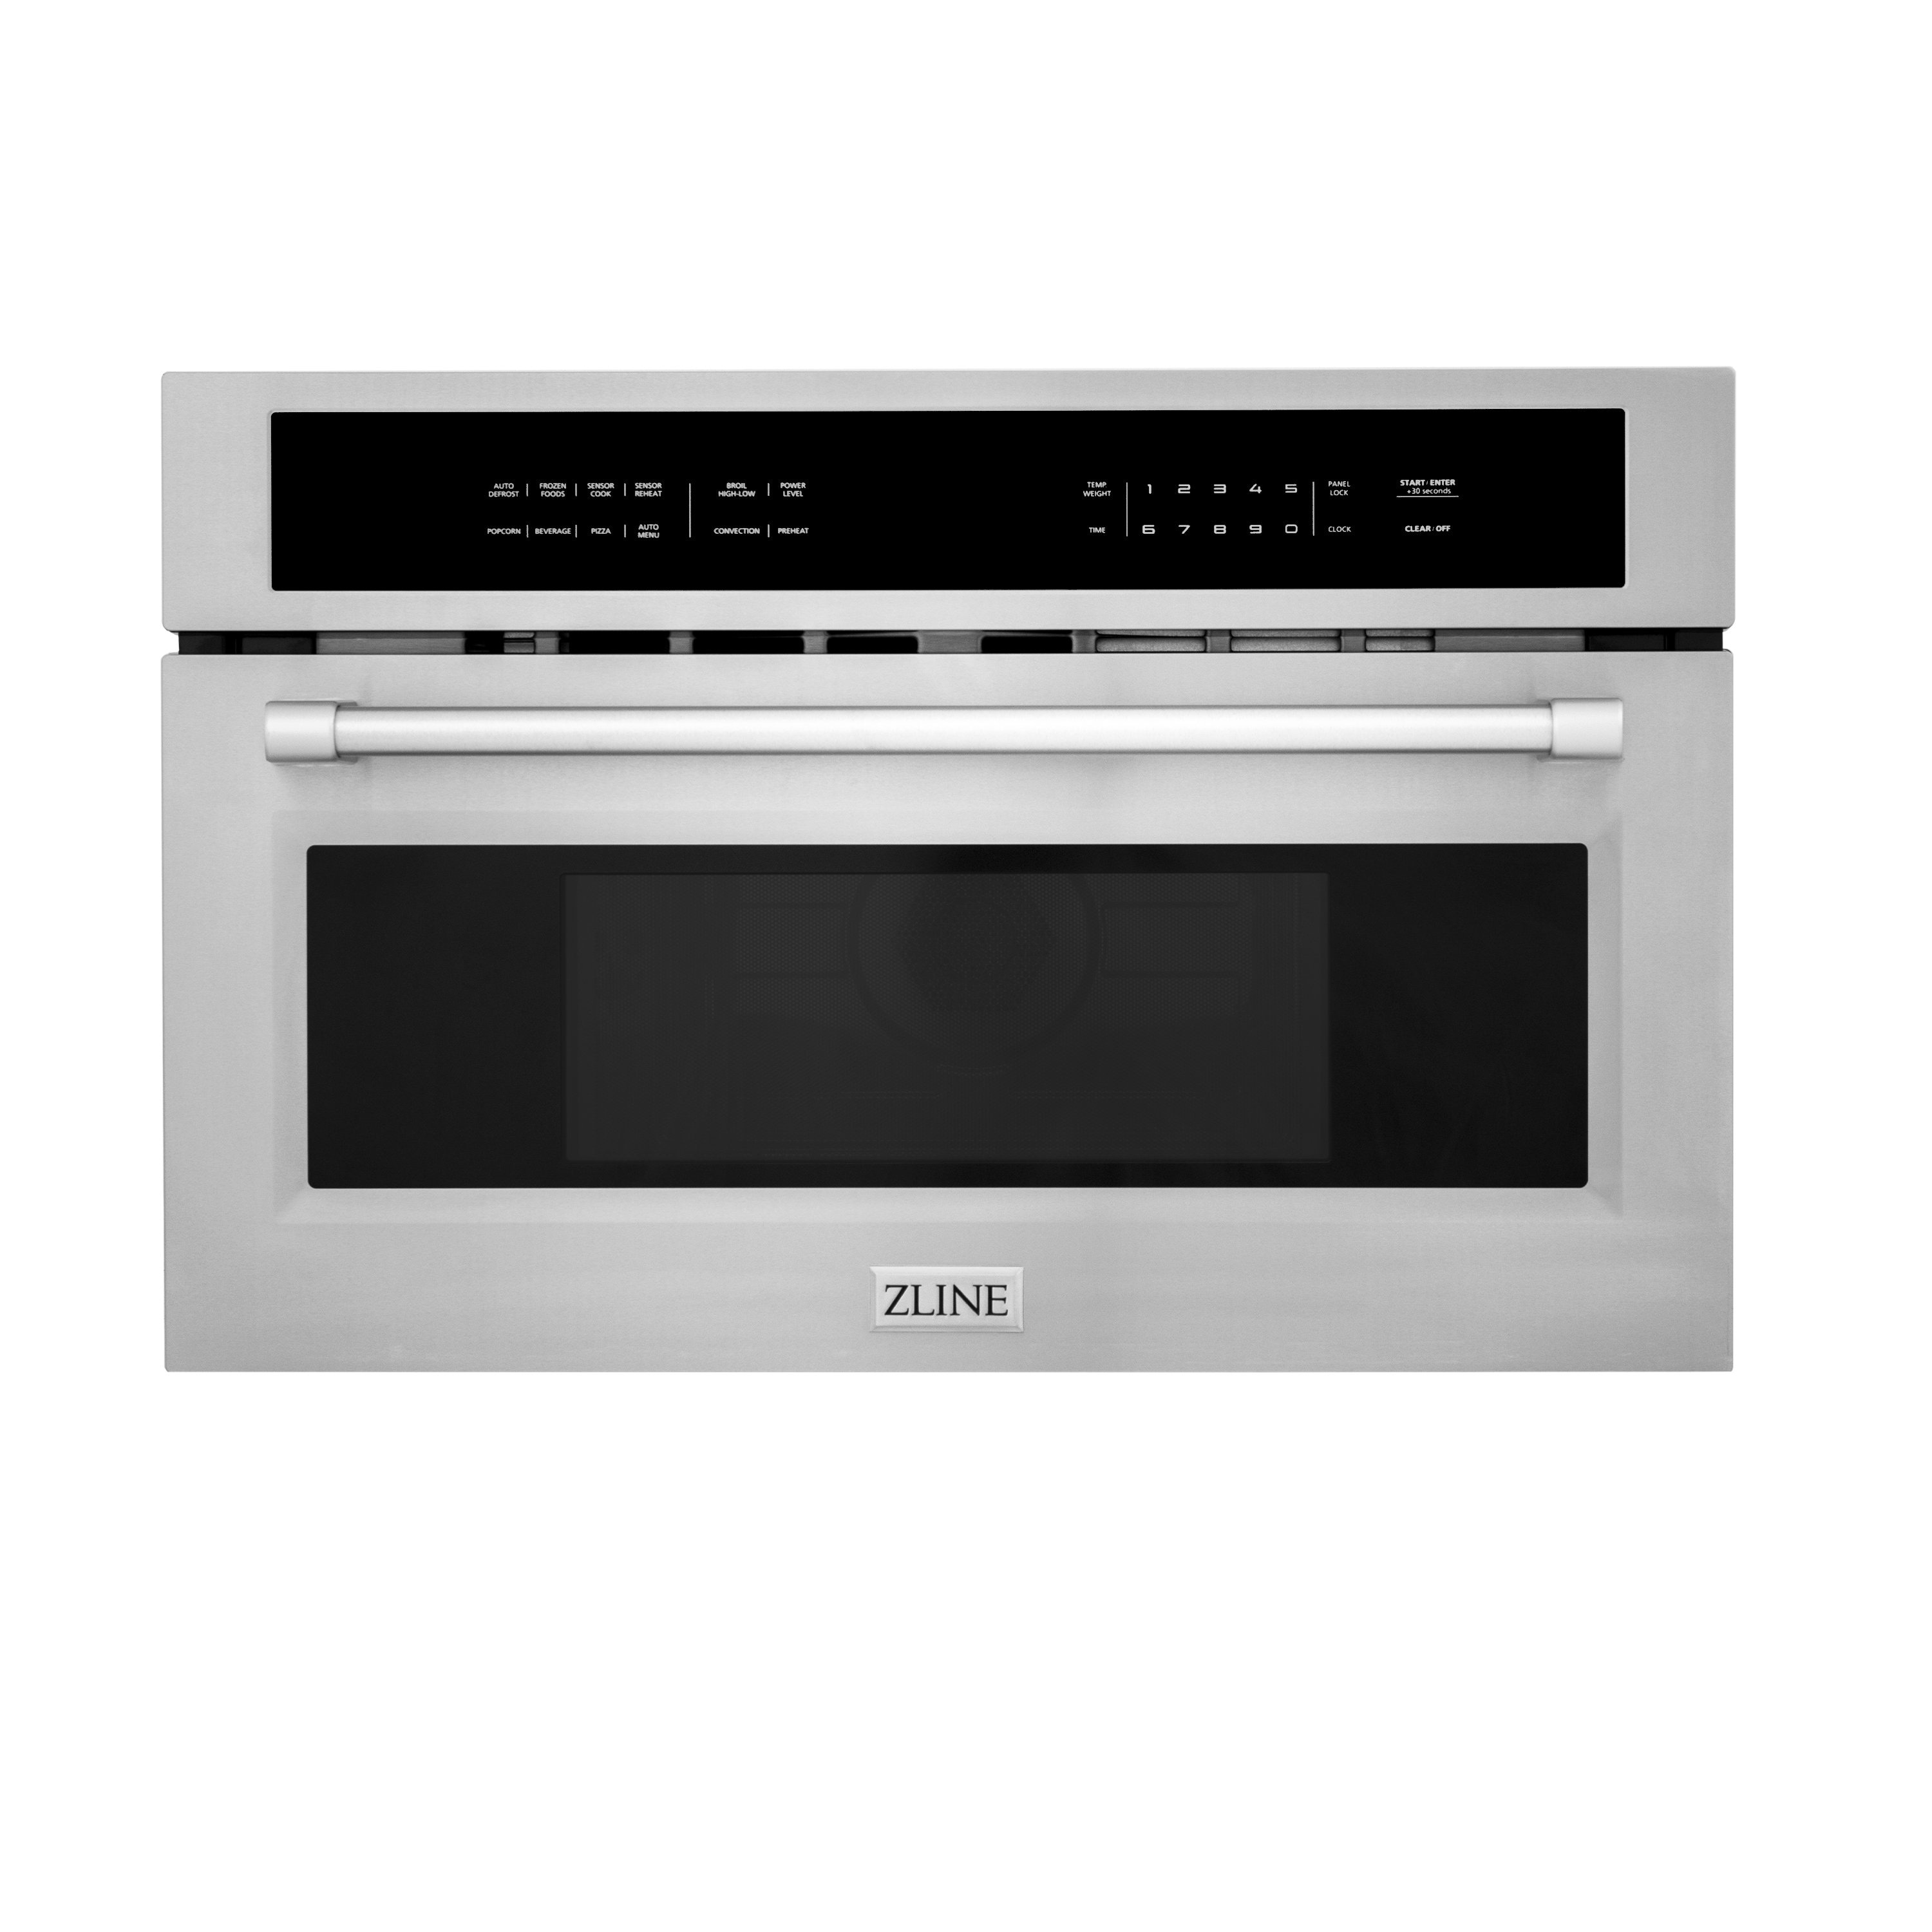 0.7 Cu. Ft. Microwave Oven 700W - Stainless Steel - The Westview Shop